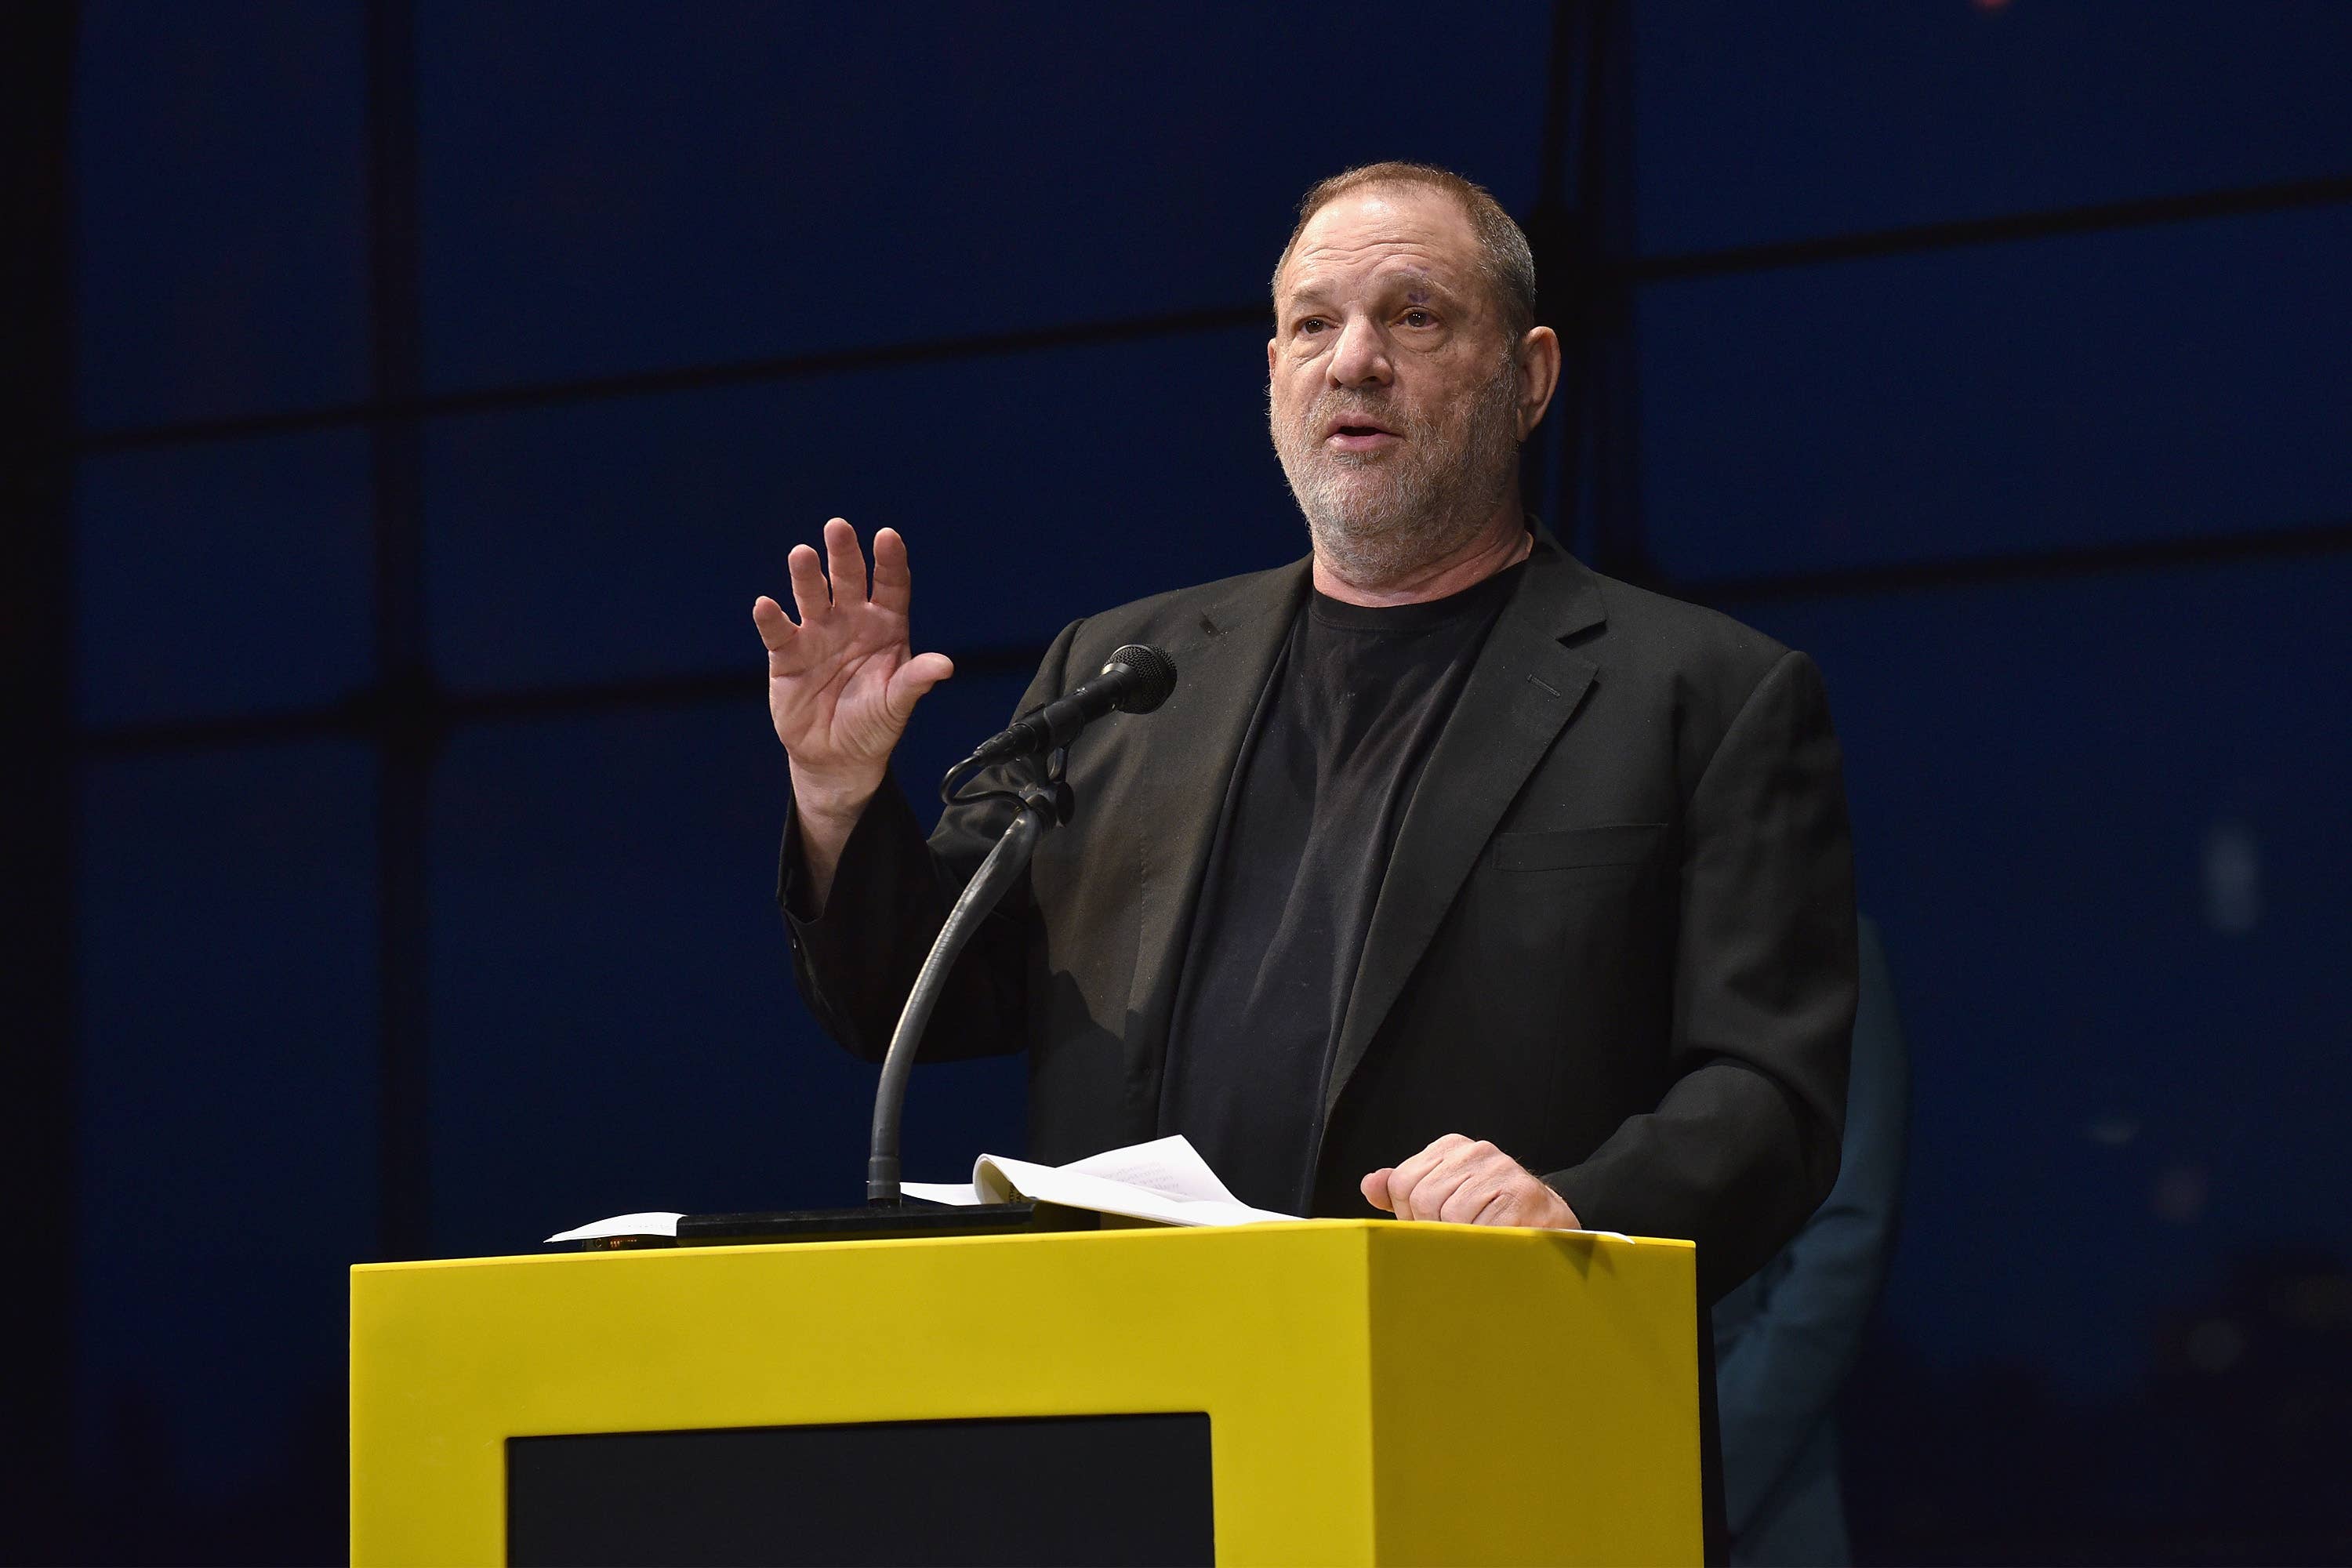 Harvey Weinstein speaks at National Geographic's Further Front Event